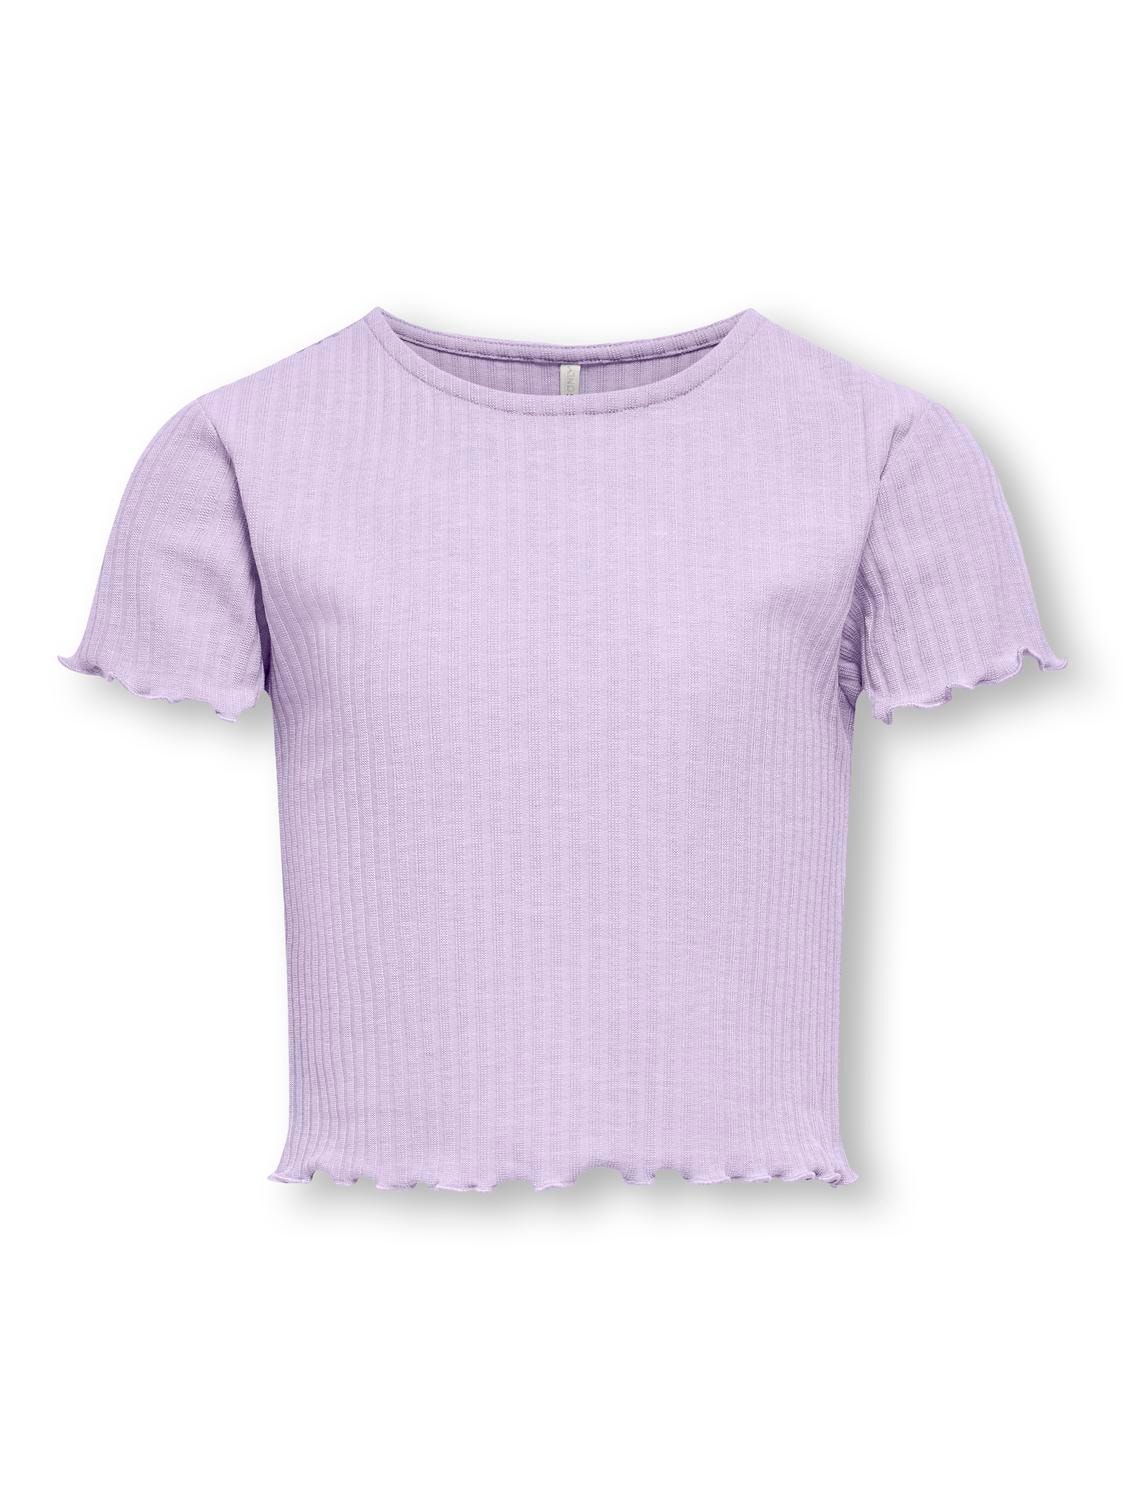 ONLY Cropped Top -Pastel Lilac - 15225338